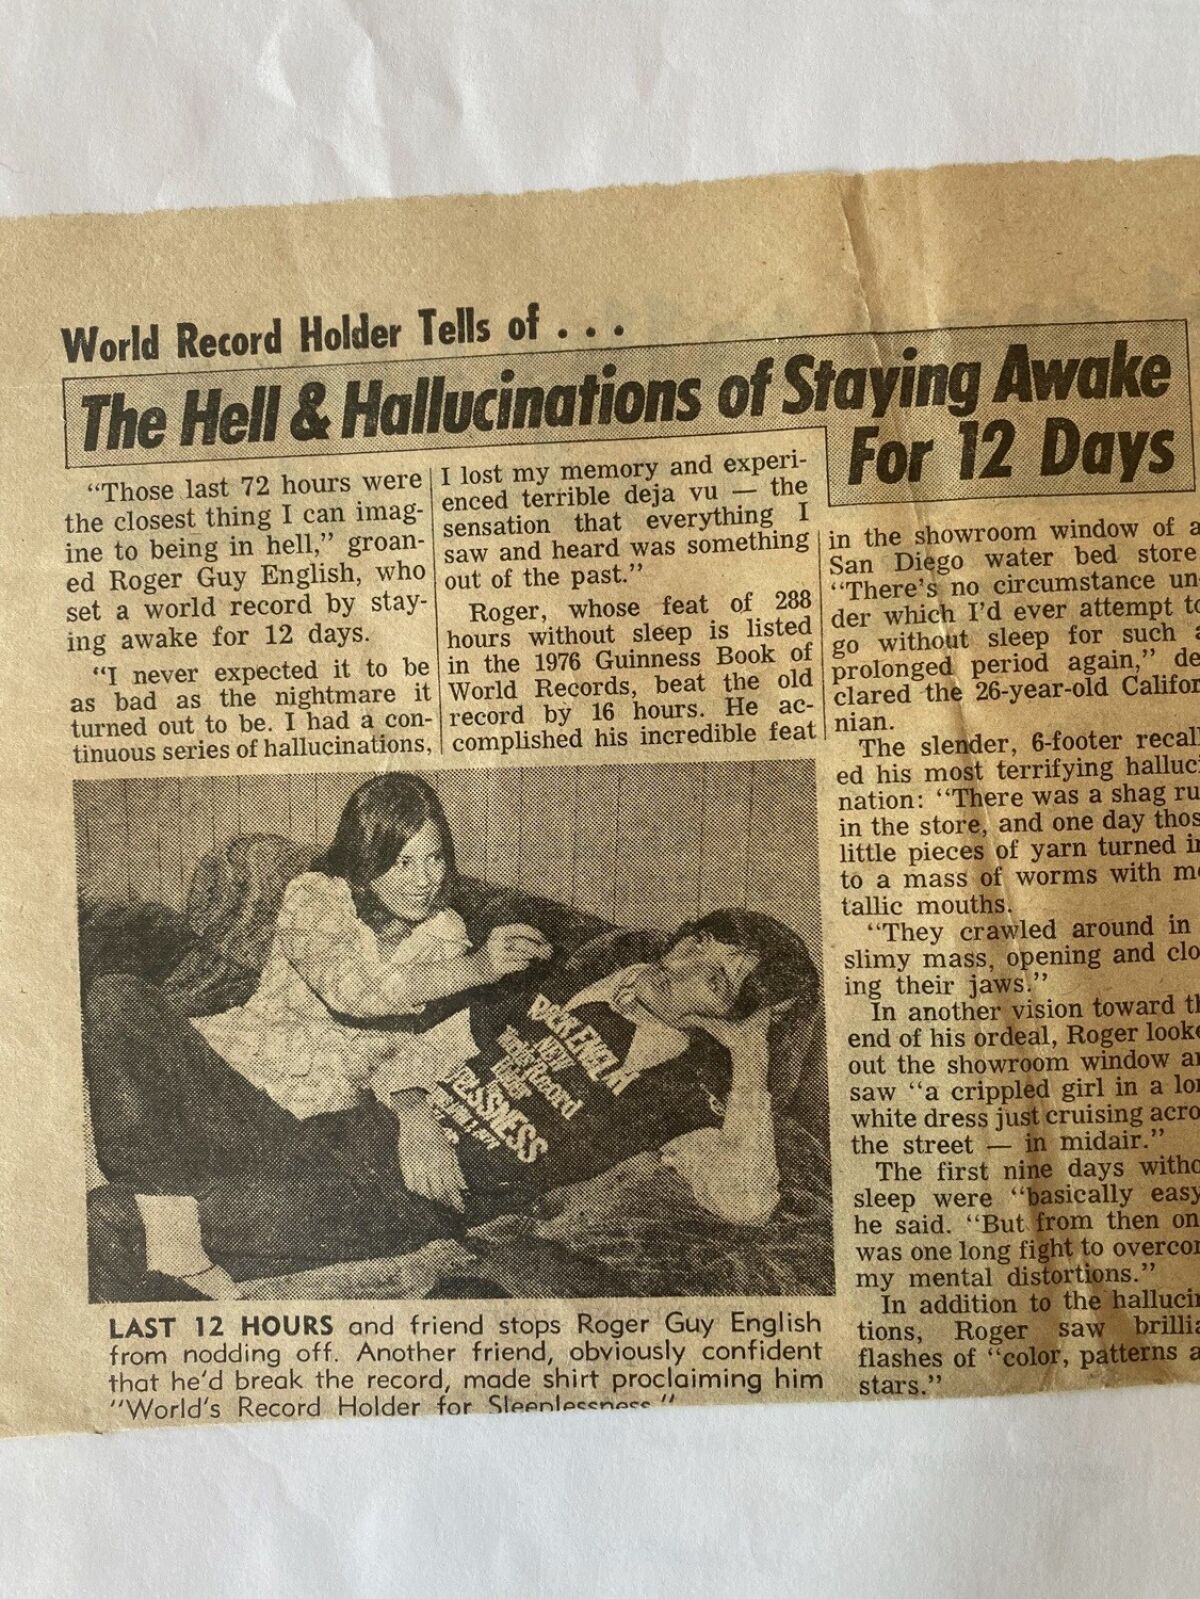 Roger Guy English is featured in a newspaper article about his world record for staying awake.